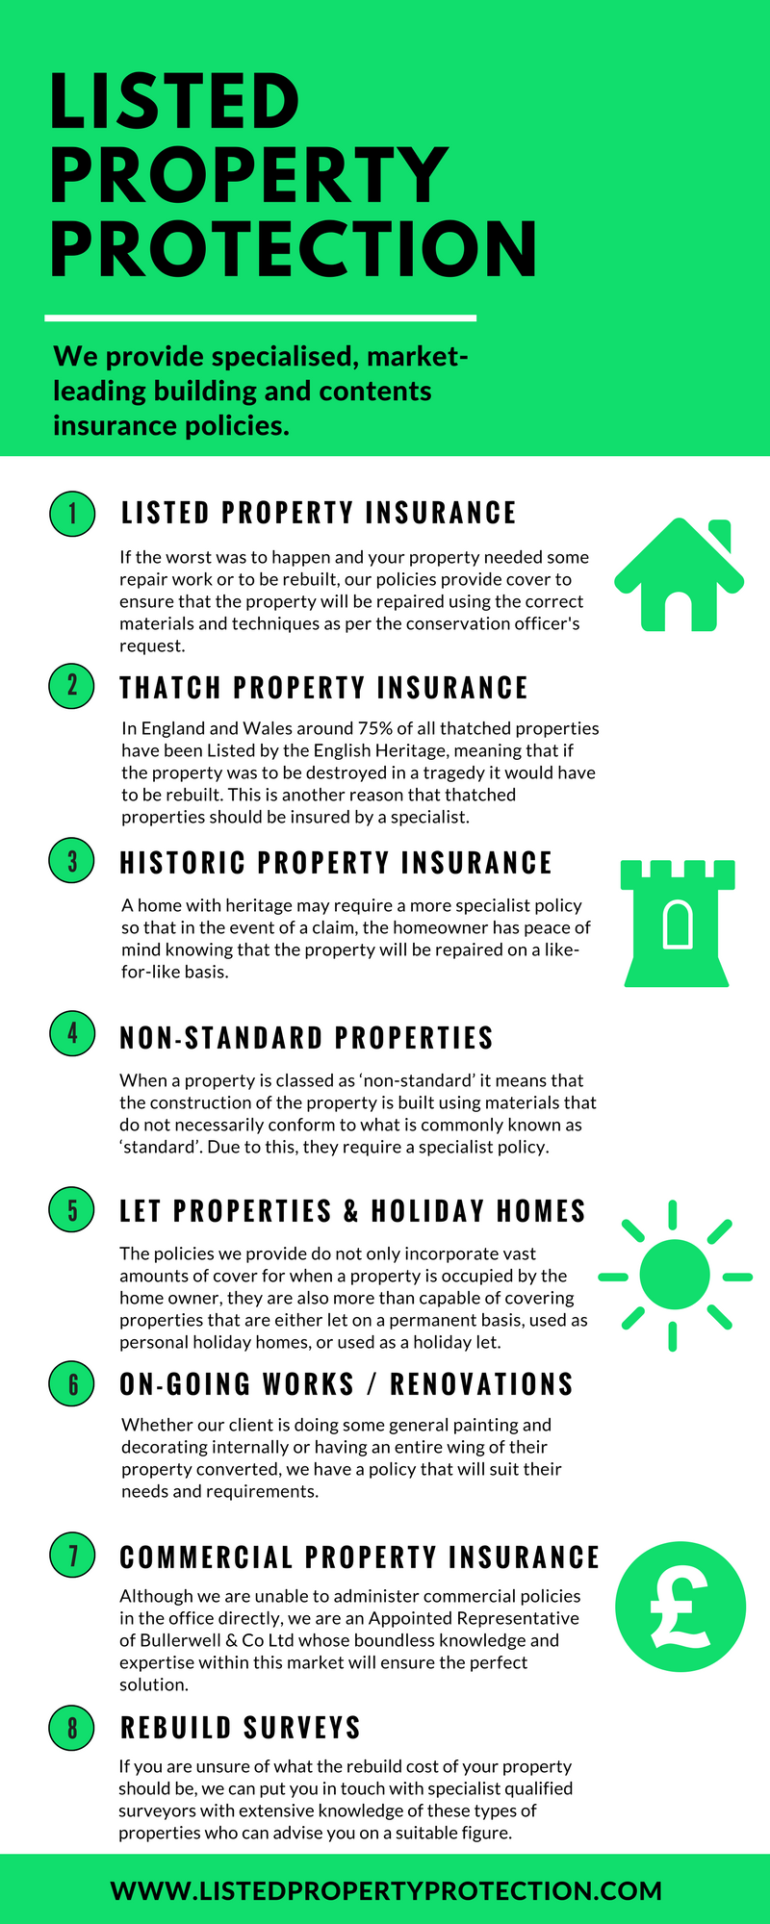 Listed Property Protection: Types of Specialist Insurance